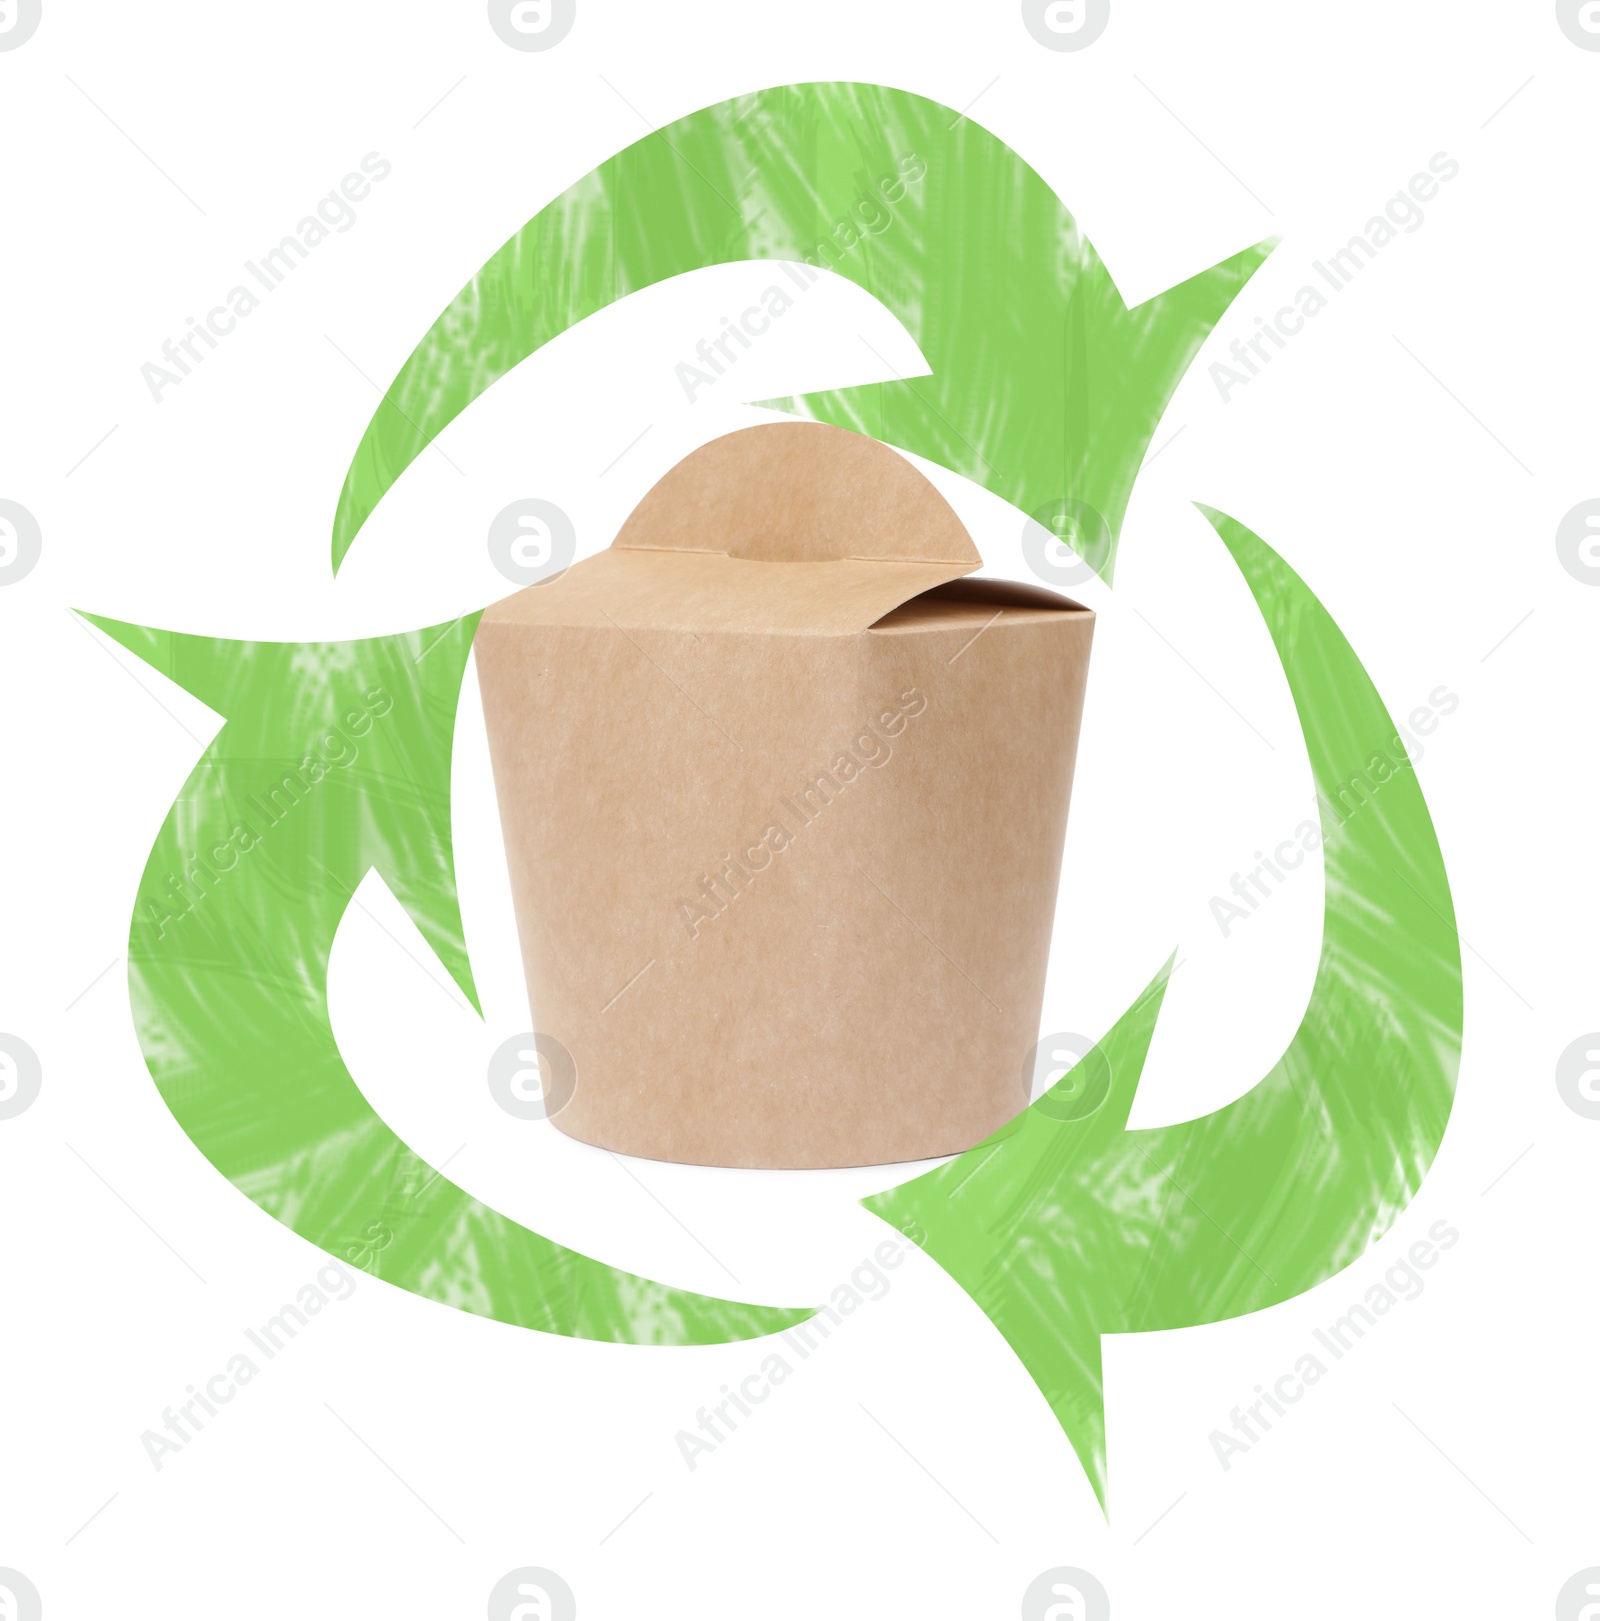 Image of Paper box and recycling symbol on white background